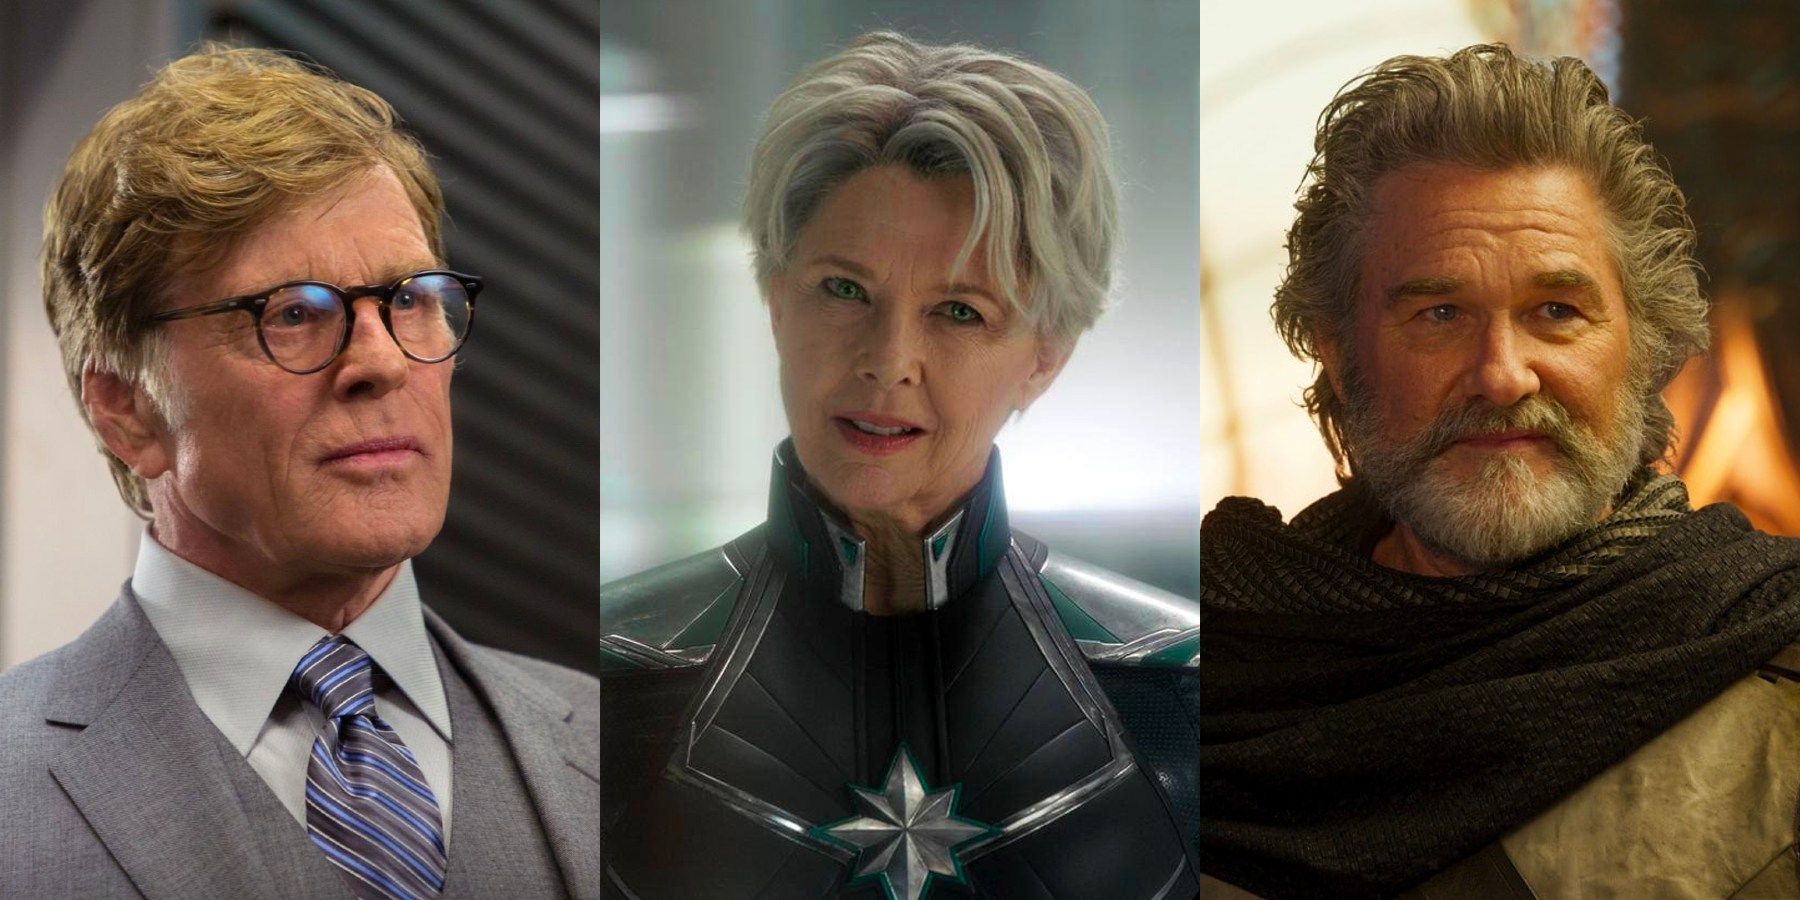 Split image: Alexander Pierce, Mar-Vell and Ego in scenes from MCU movies.